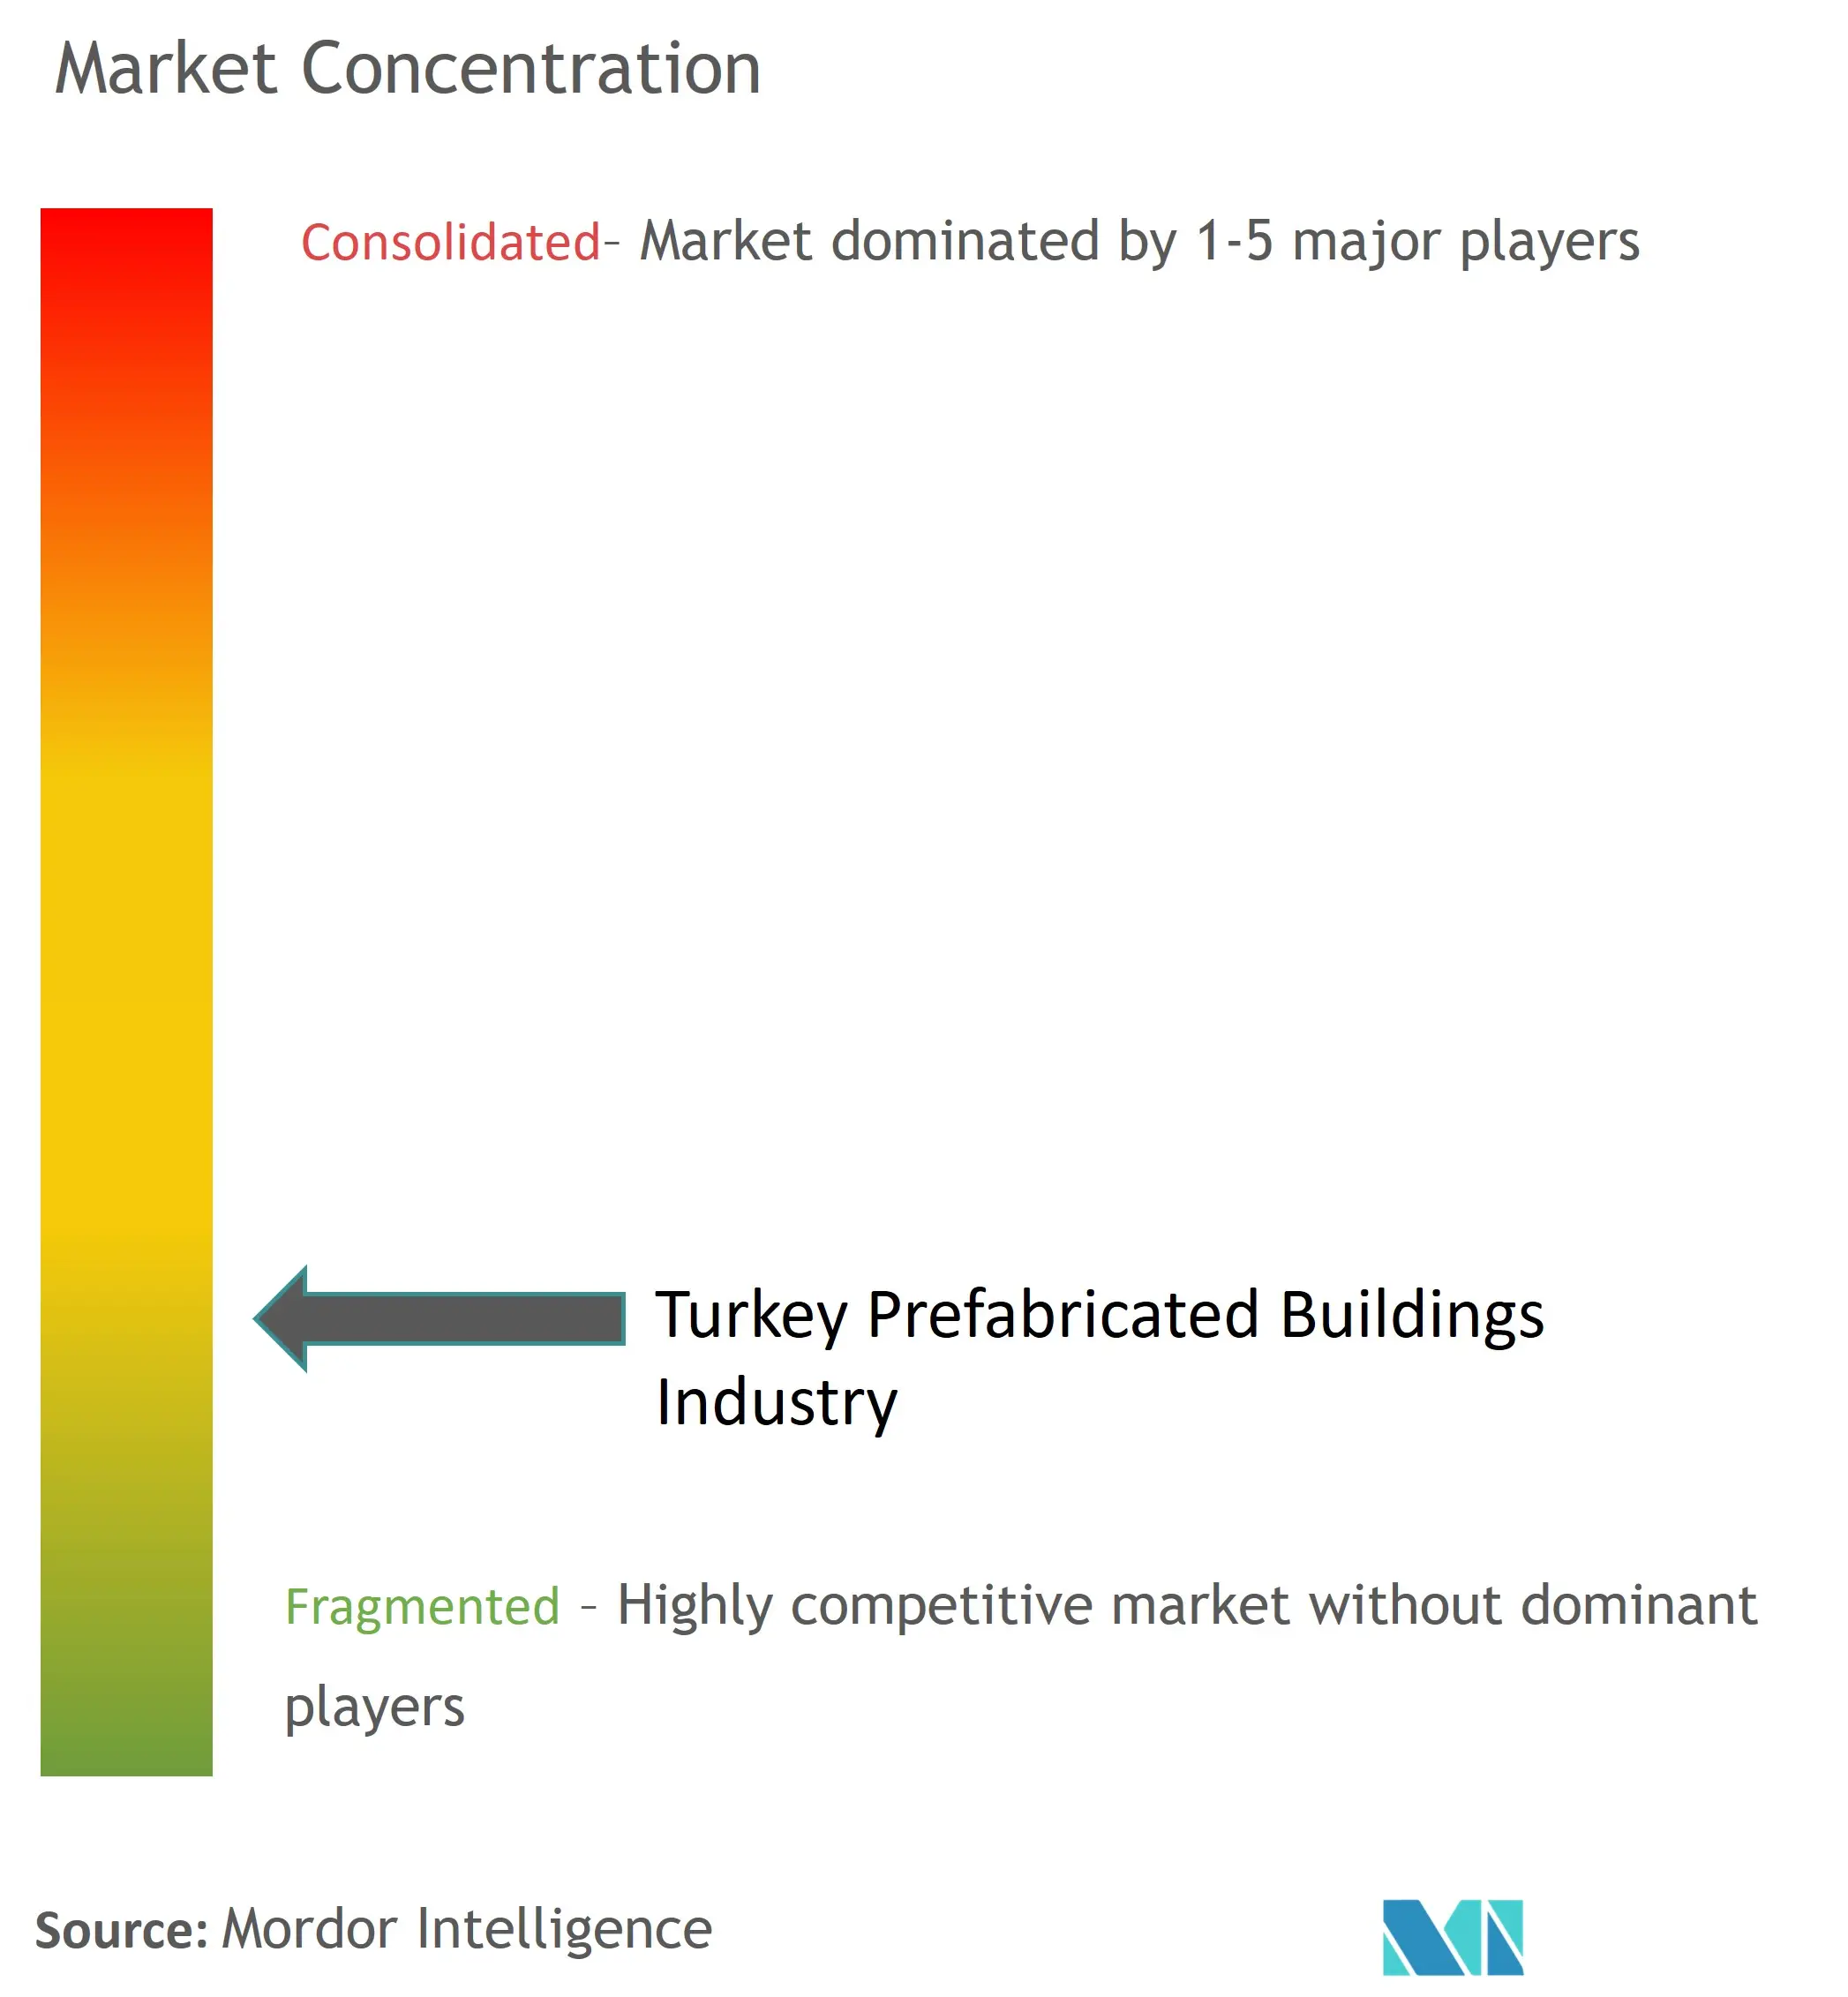 Turkey Prefabricated Buildings Industry Market Concentration